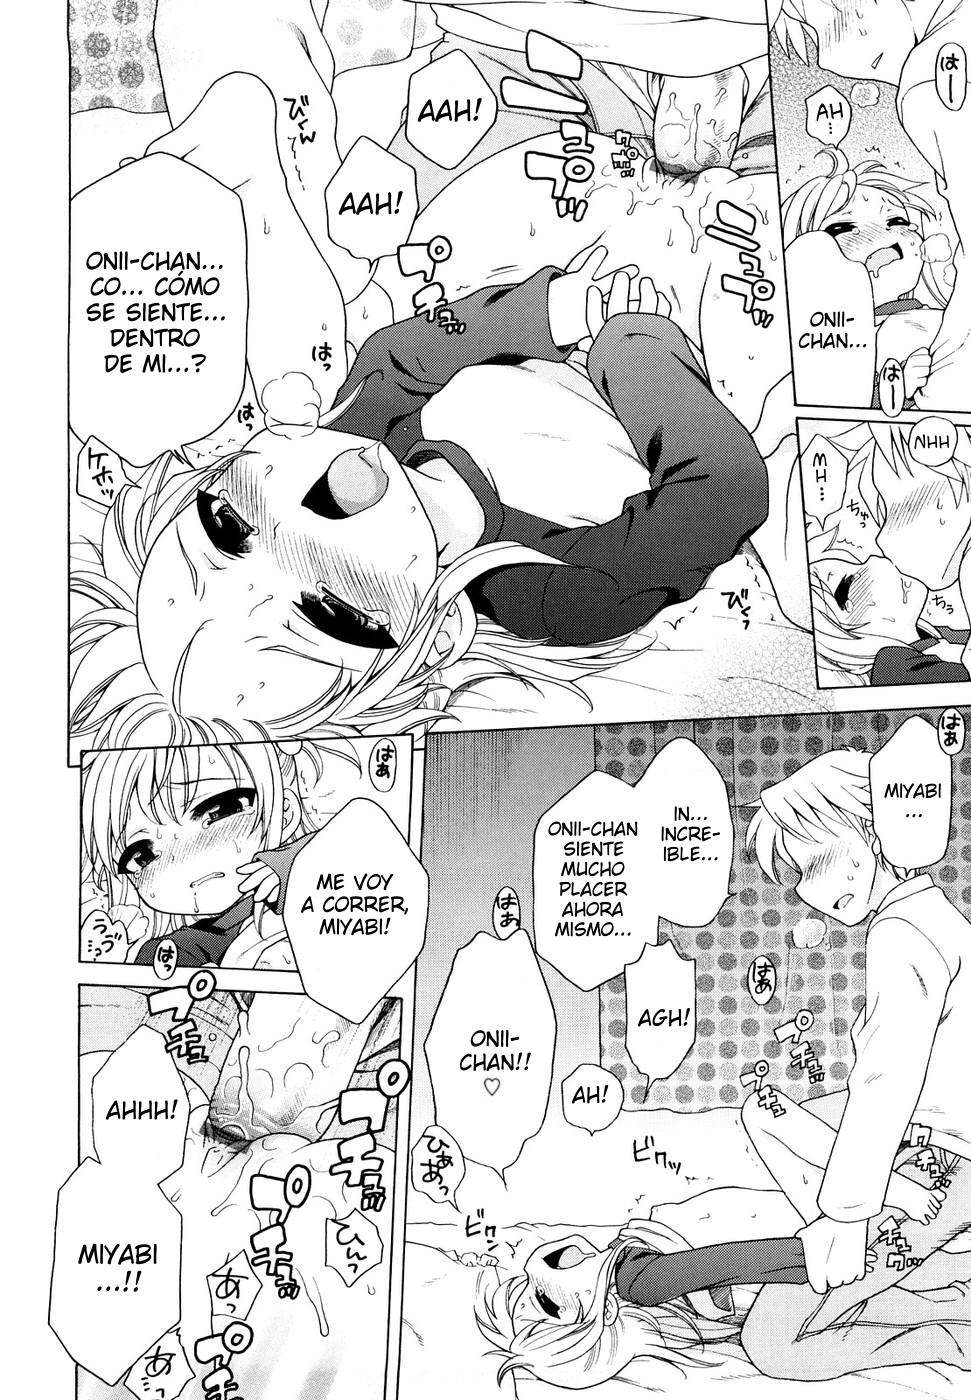 Onii-chan!! Me gustas.. Chapter-1 - 18